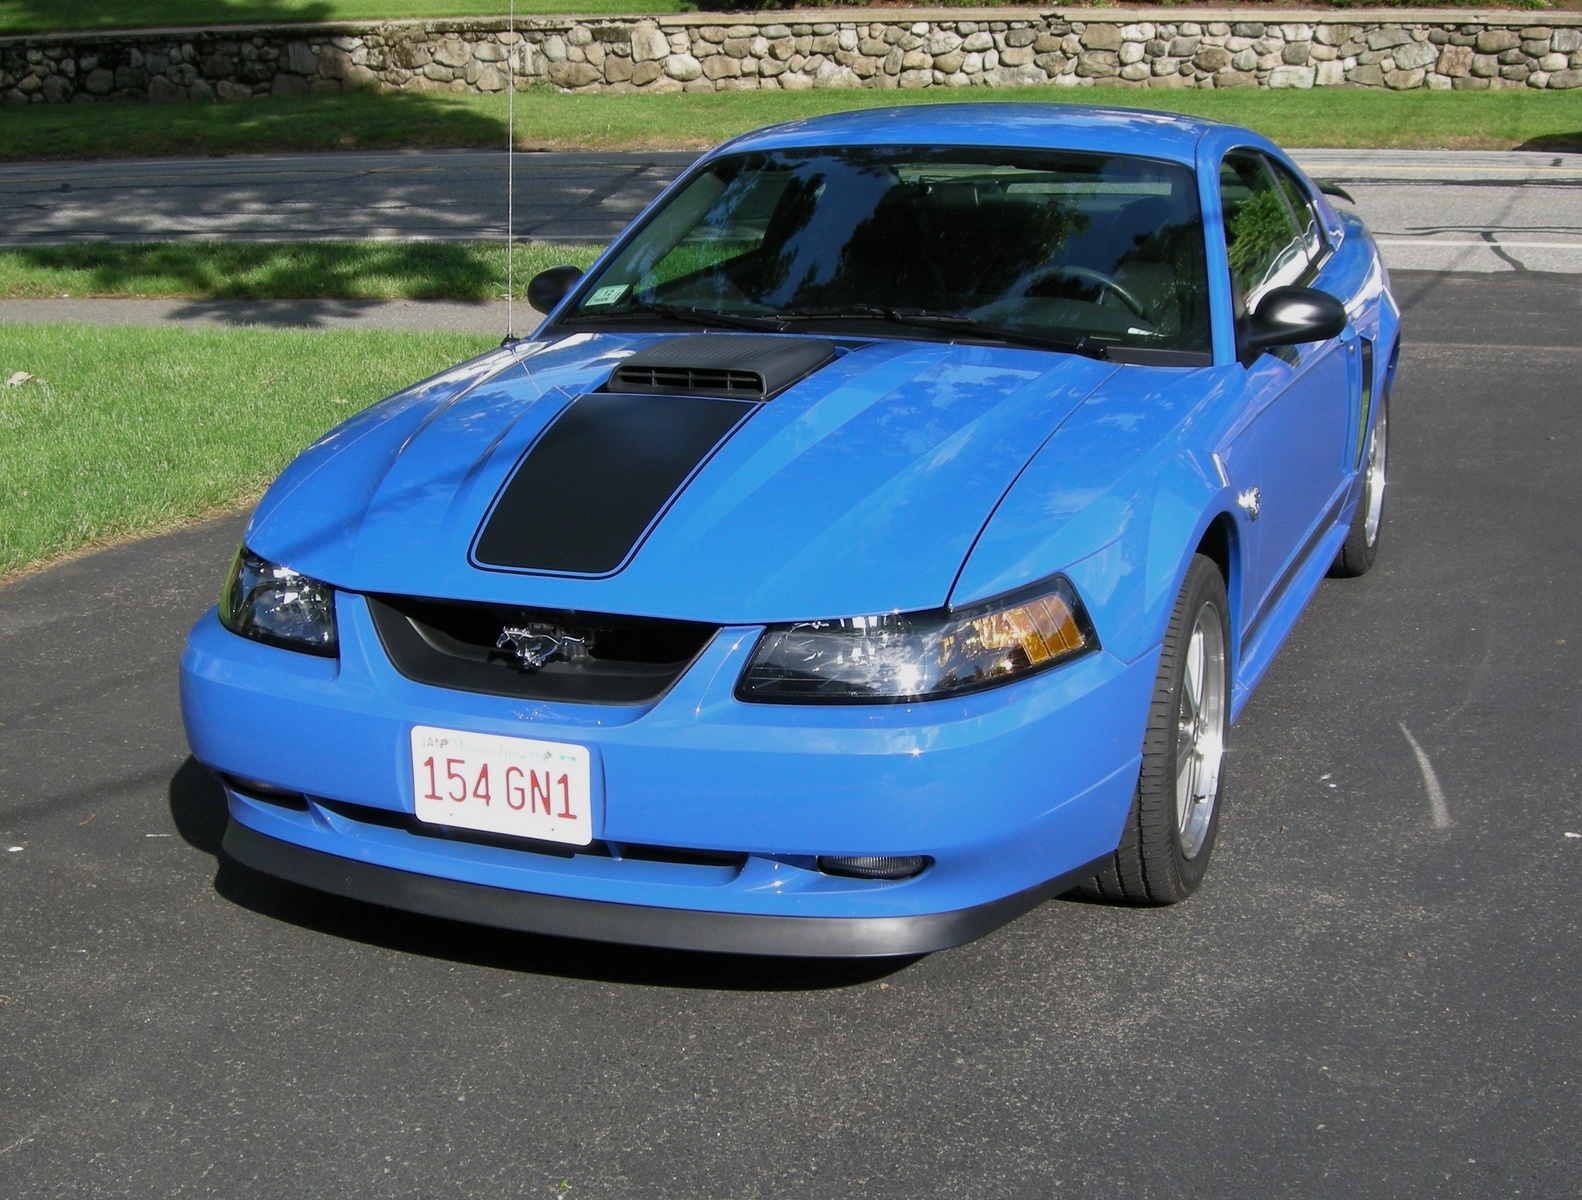 2004 Ford mach 1 mustang specs #9